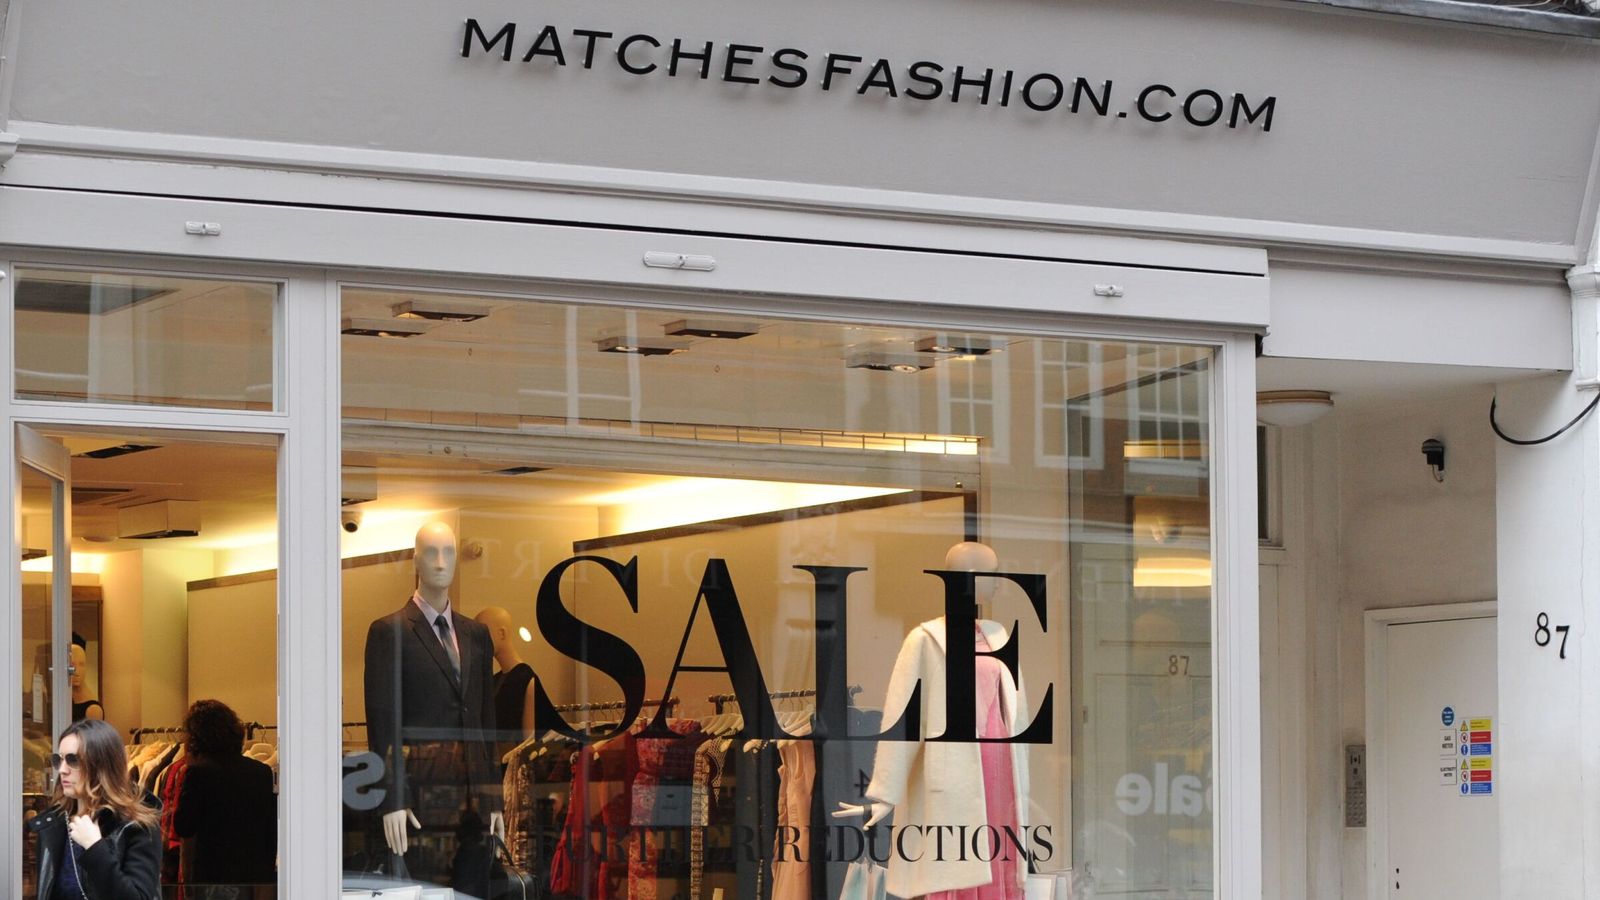 Retail tycoon Ashley plots cut-price swoop on Matchesfashion